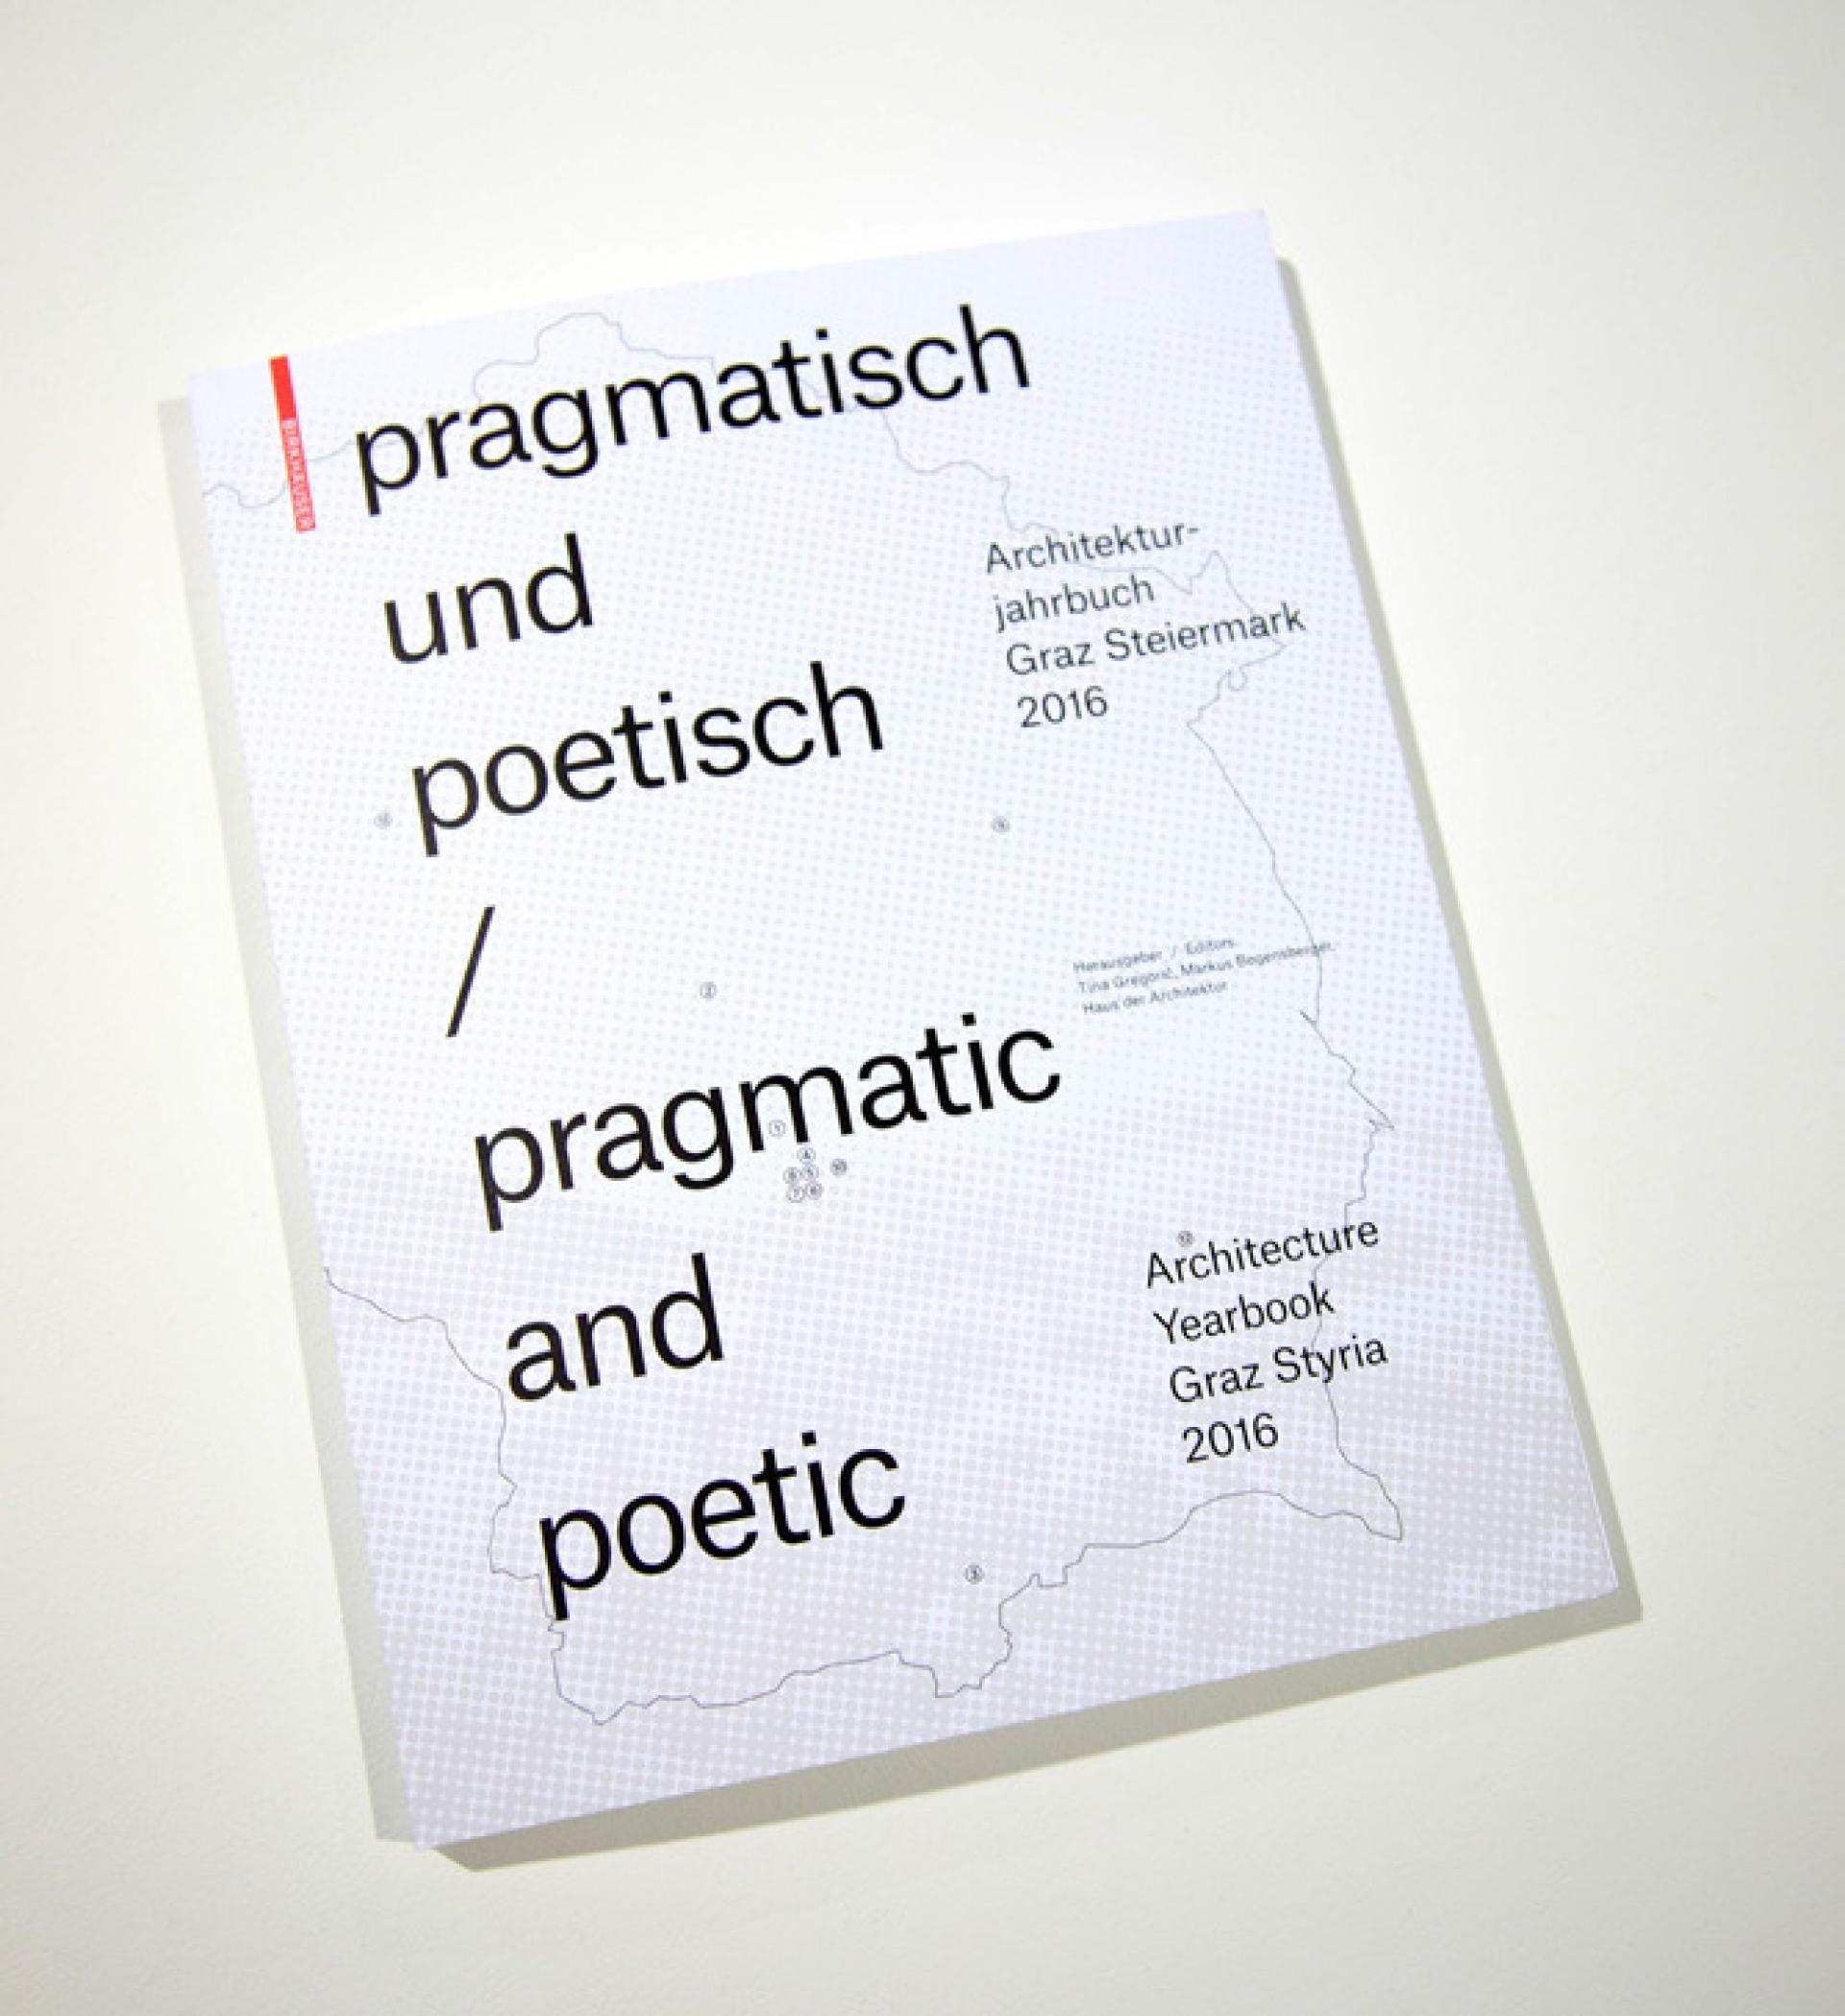 A conscientious planning process can make a decisive contribution and create more quality in built environment. “Pragmatic Poetic” edited by Tina Gregorič and Markus Bogensberger, published by Birkhäuser Basel.